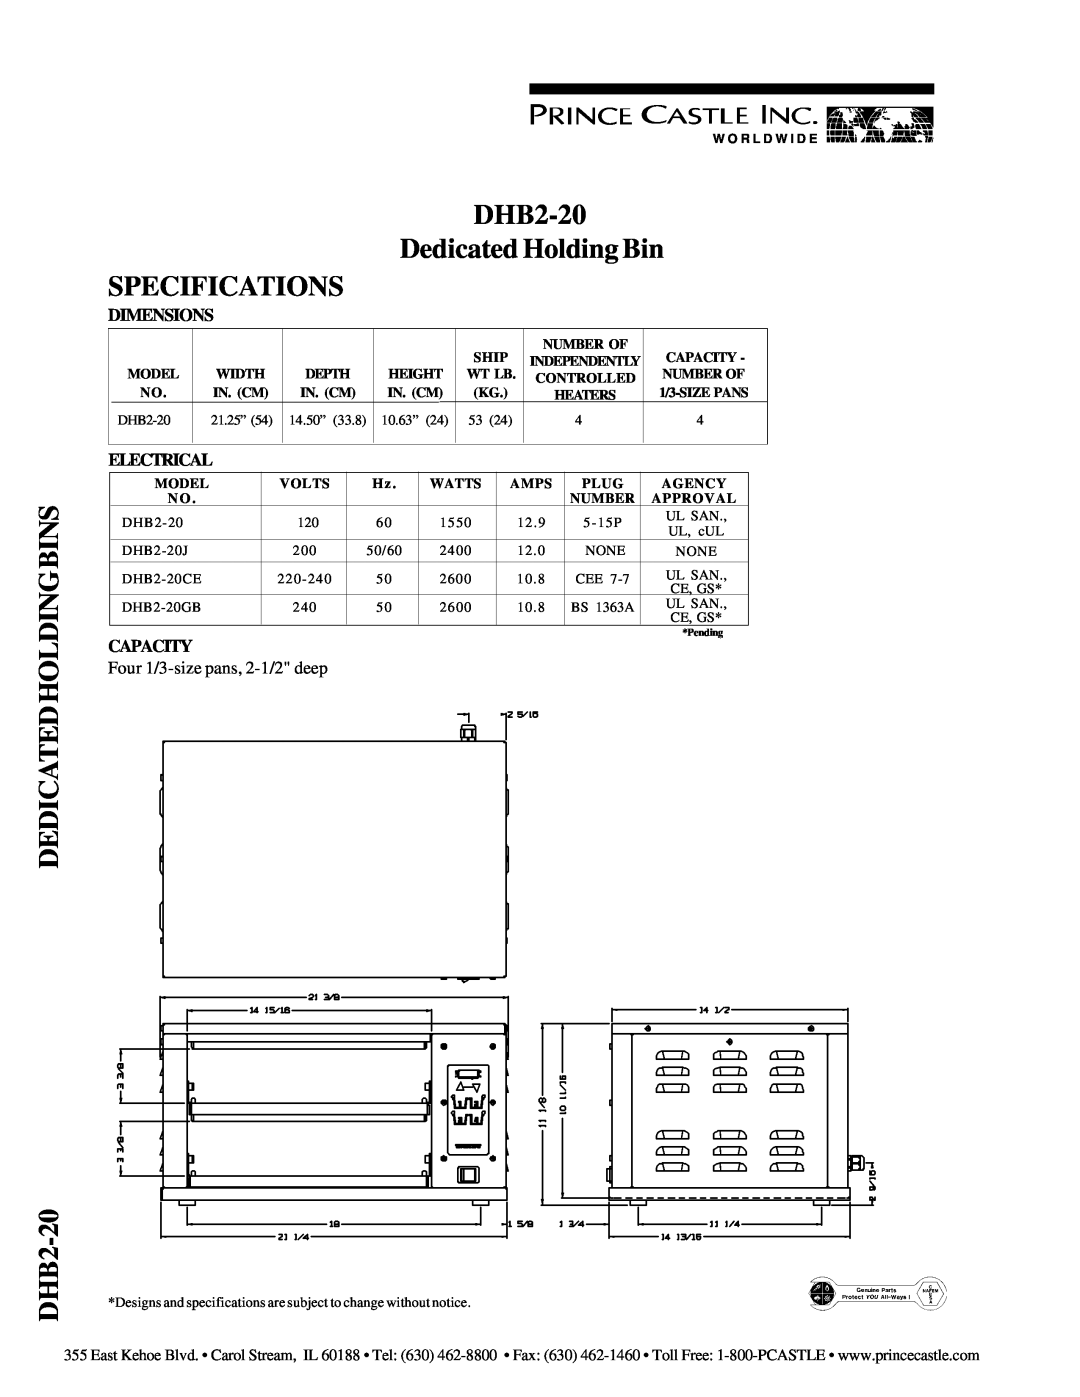 Prince Castle DEDICATEDHOLDINGBINS DHB2-20, DHB2-20 Dedicated Holding Bin SPECIFICATIONS, Dimensions, Electrical, Ship 